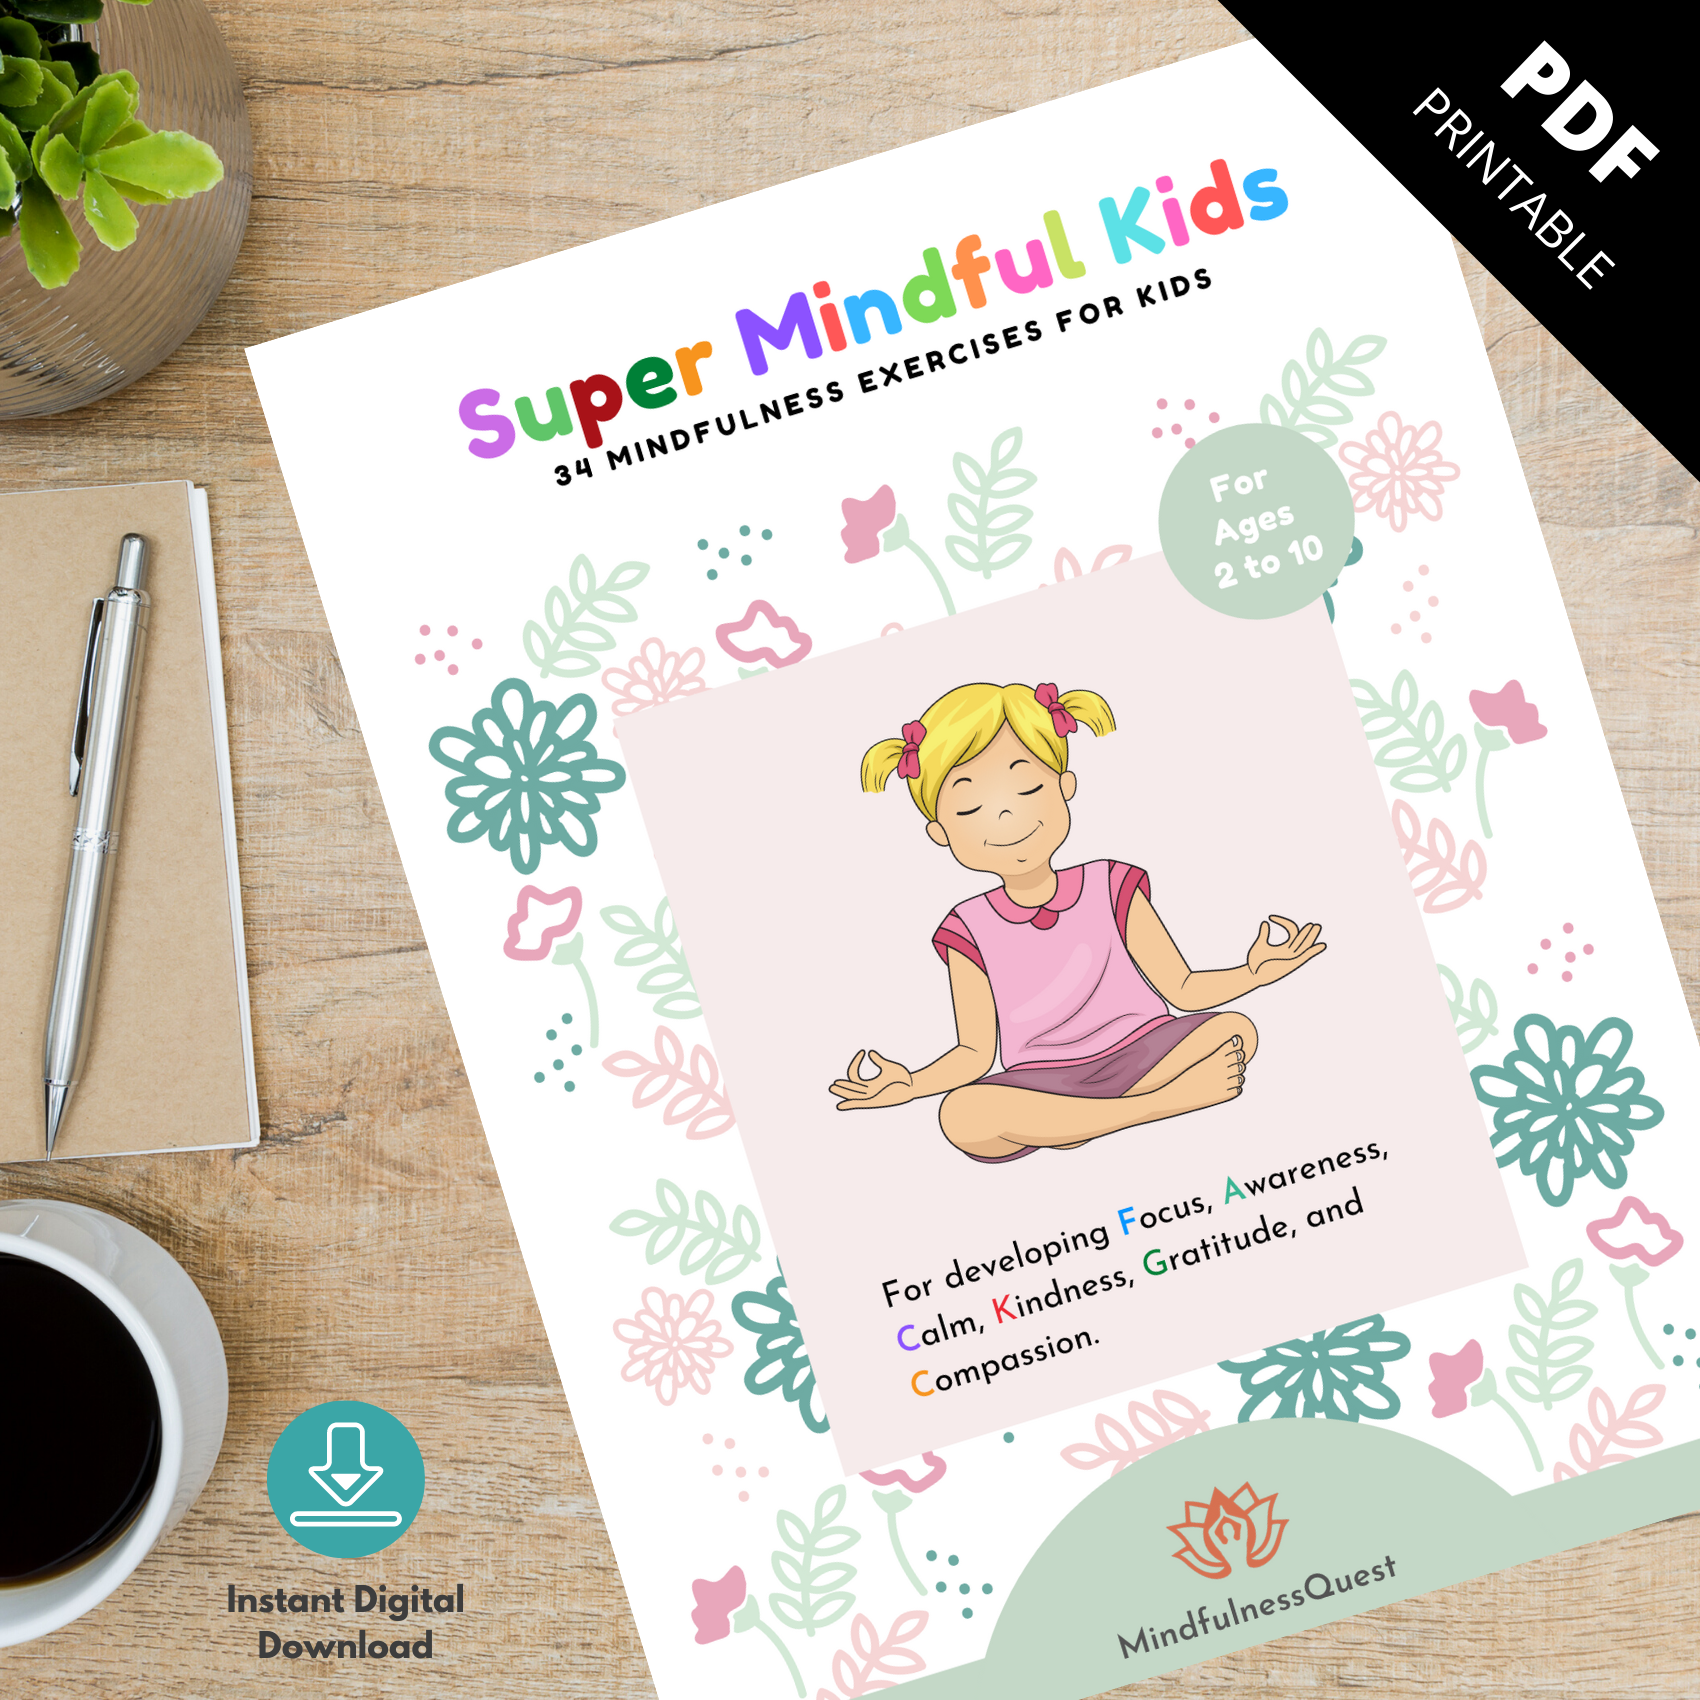 mindfulness activities for kids